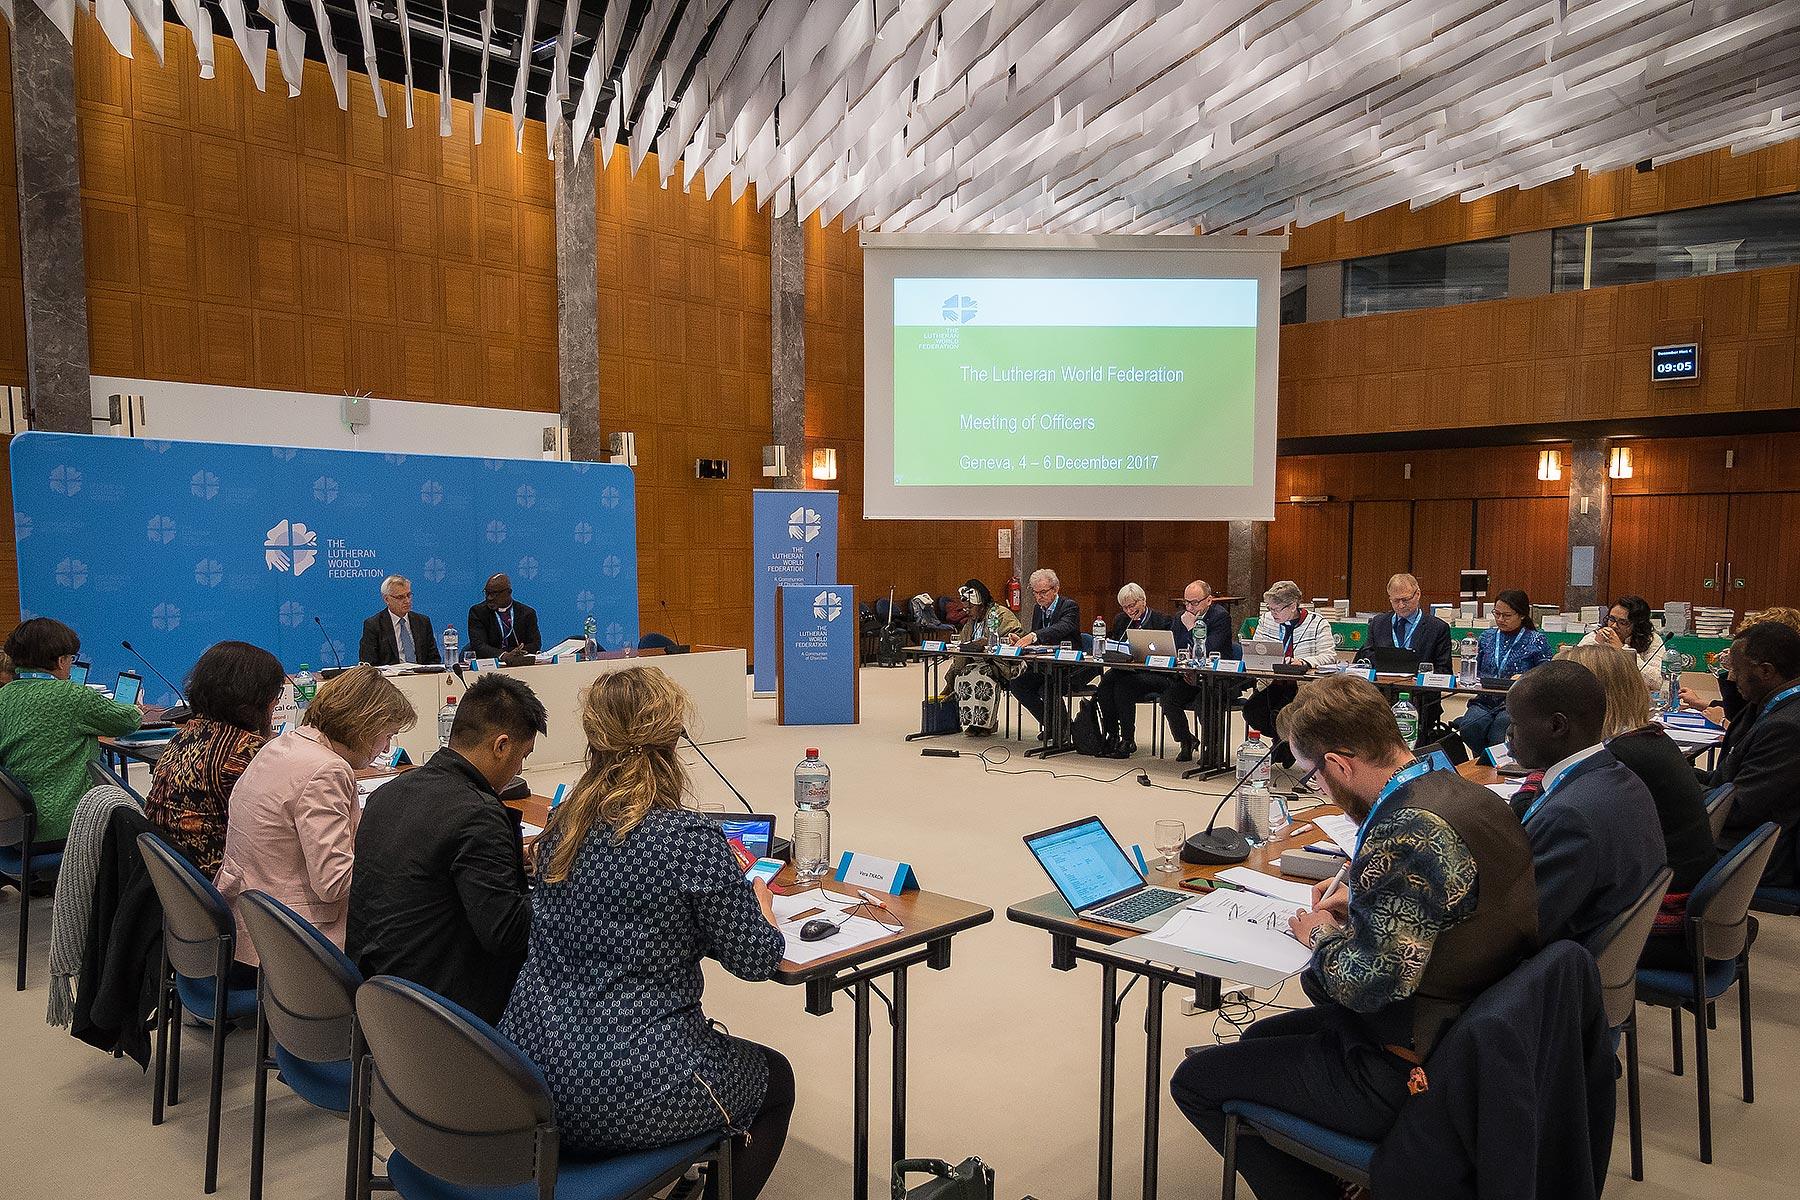 The Meeting of Officers met for the second time in Geneva, Switzerland on the 5 December 2017. Photo: LWF/S. Gallay